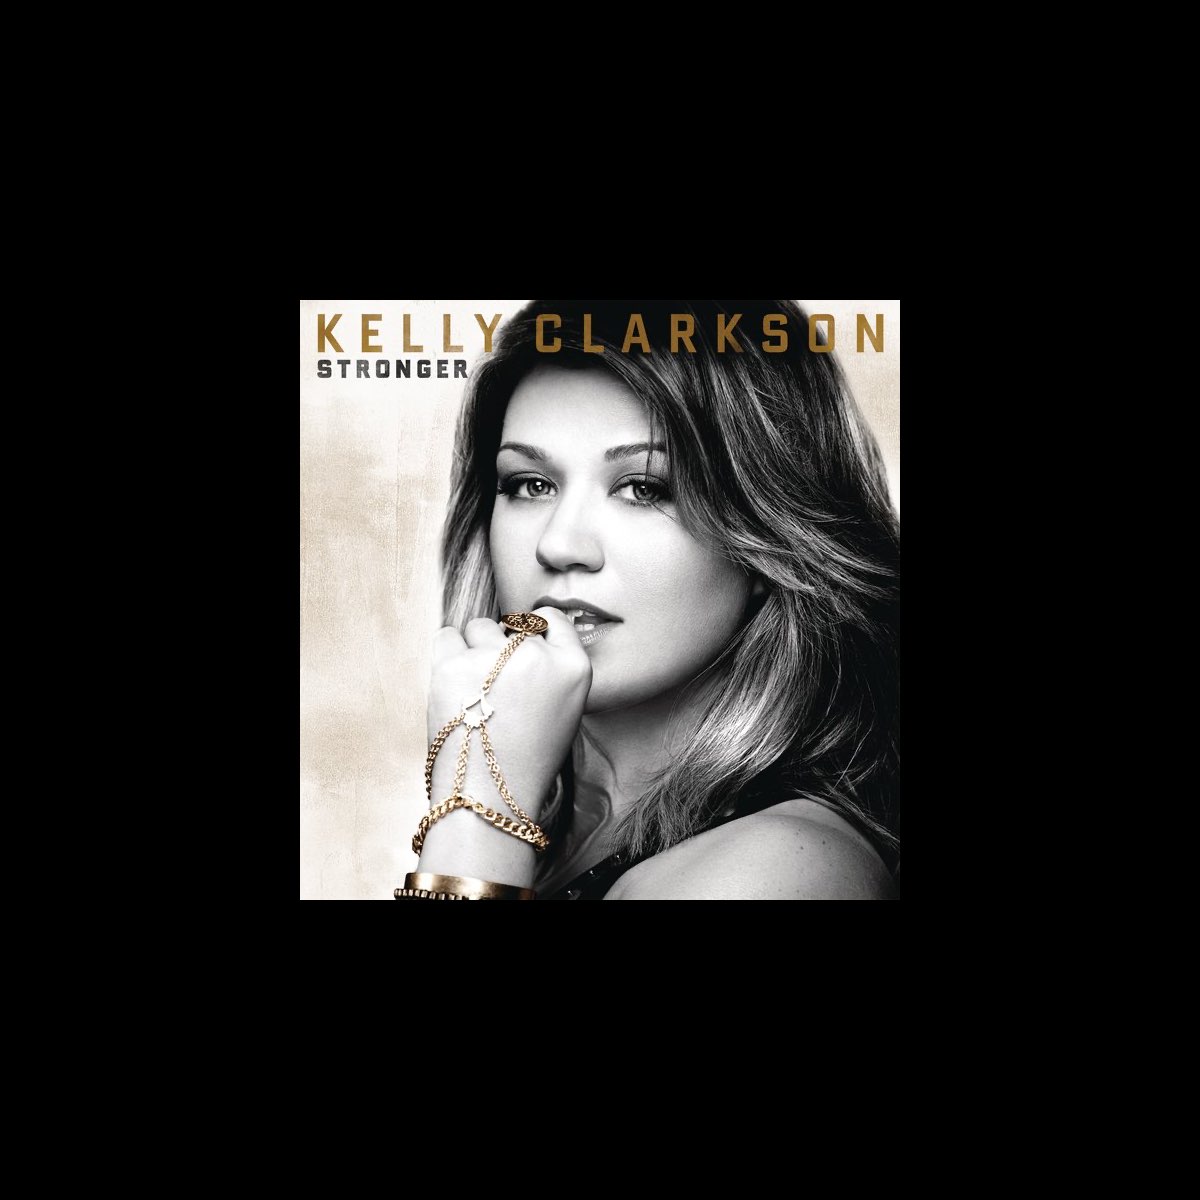 ‎Stronger (Deluxe Version) by Kelly Clarkson on Apple Music